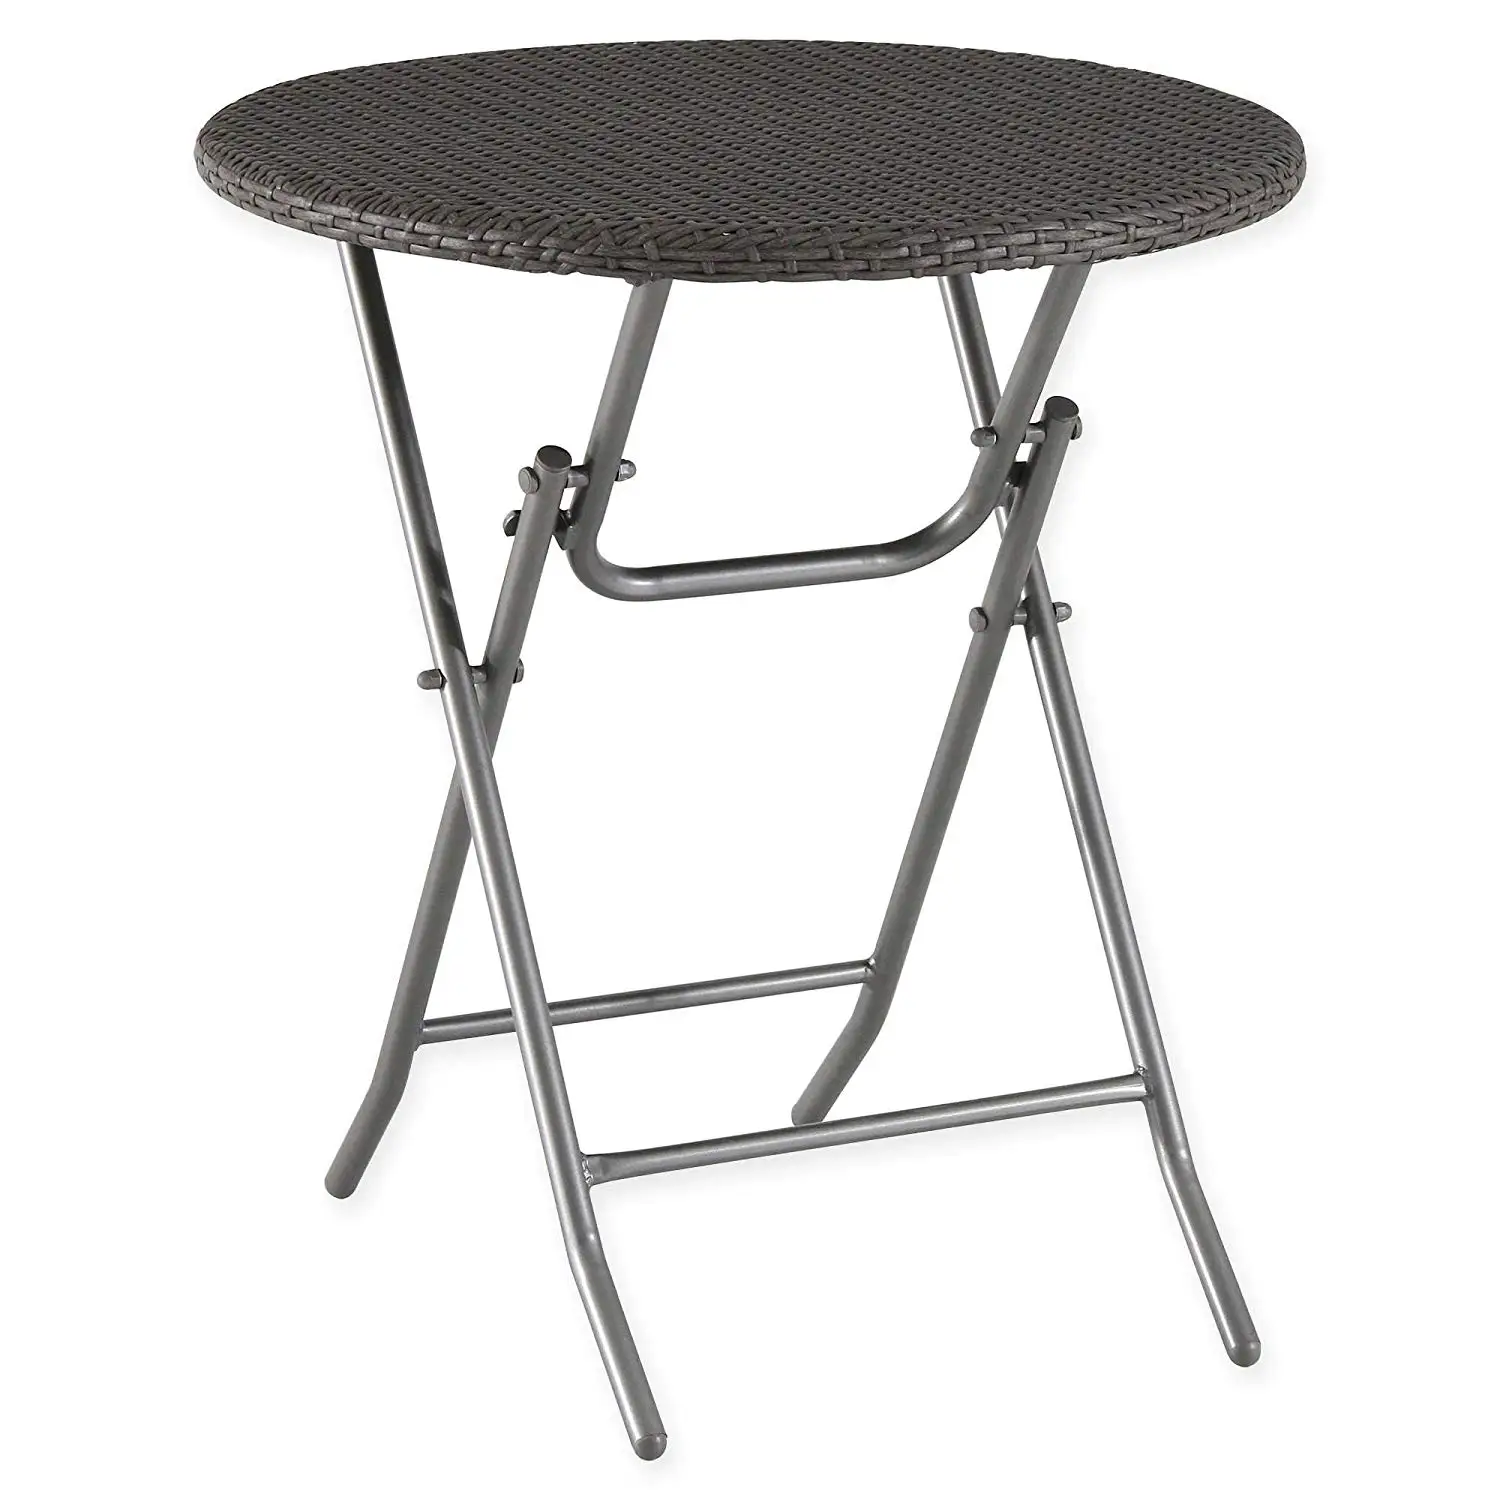 Cheap Bistro Style Table, find Bistro Style Table deals on line at